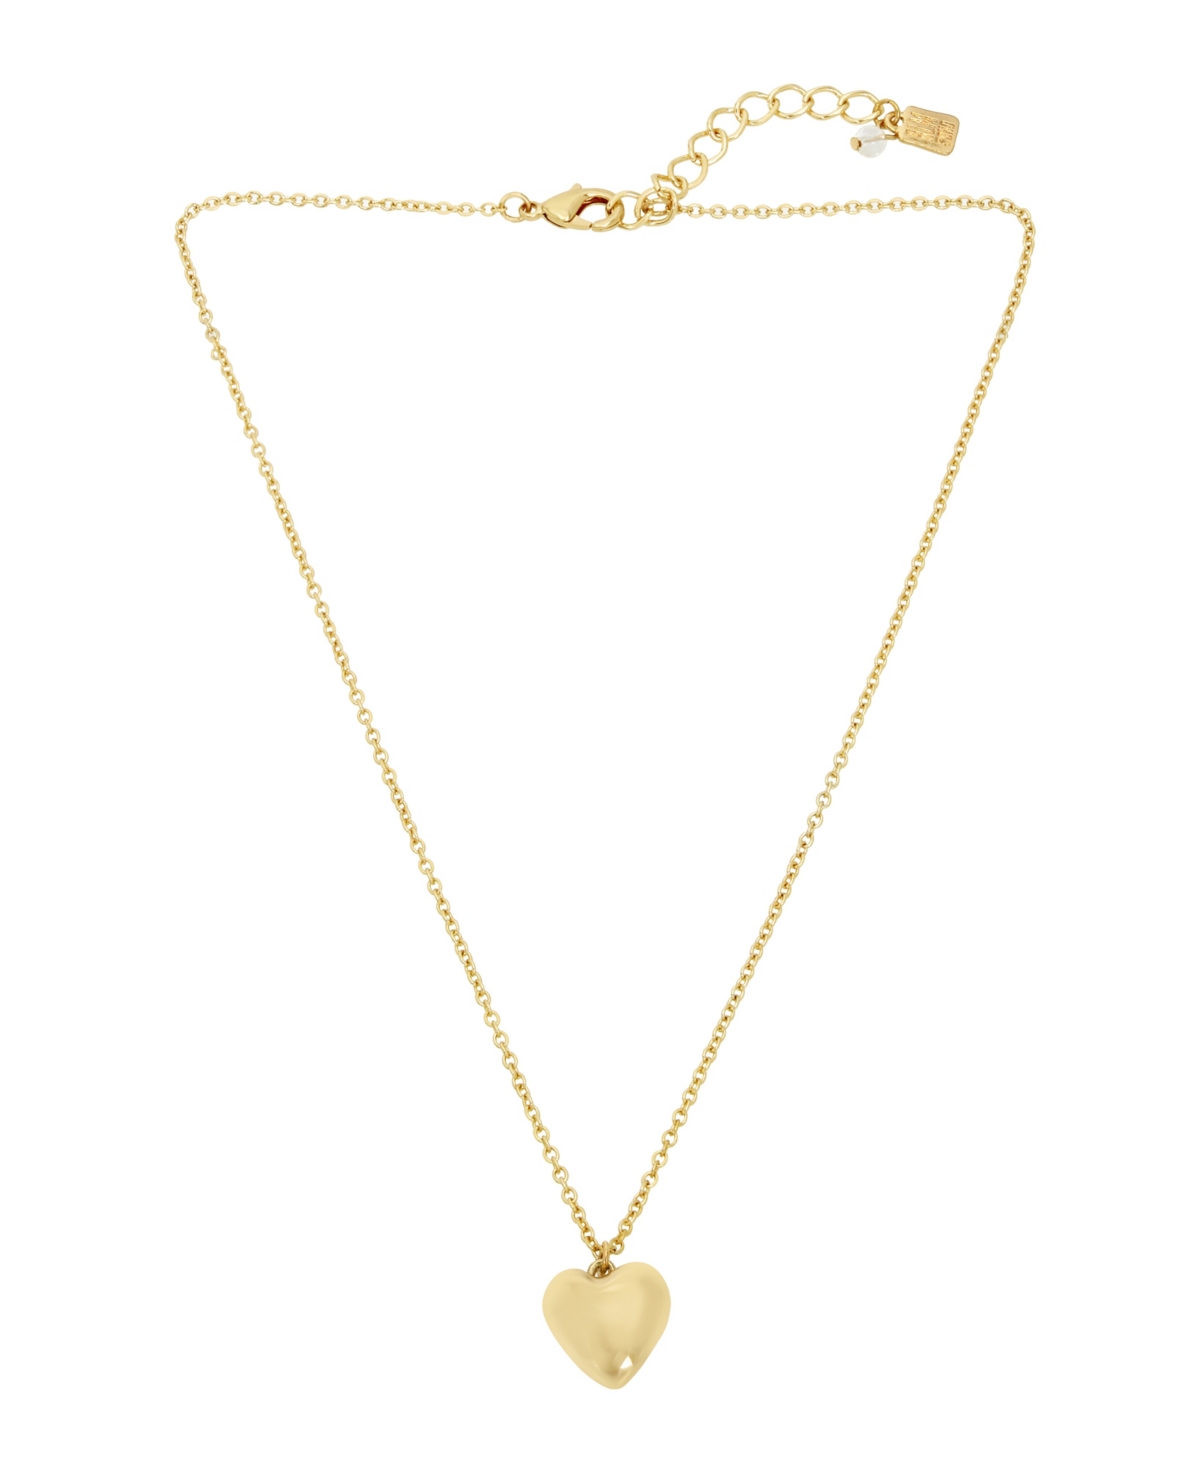 Gold-Tone Puffy Heart Pendant Necklace - Gold